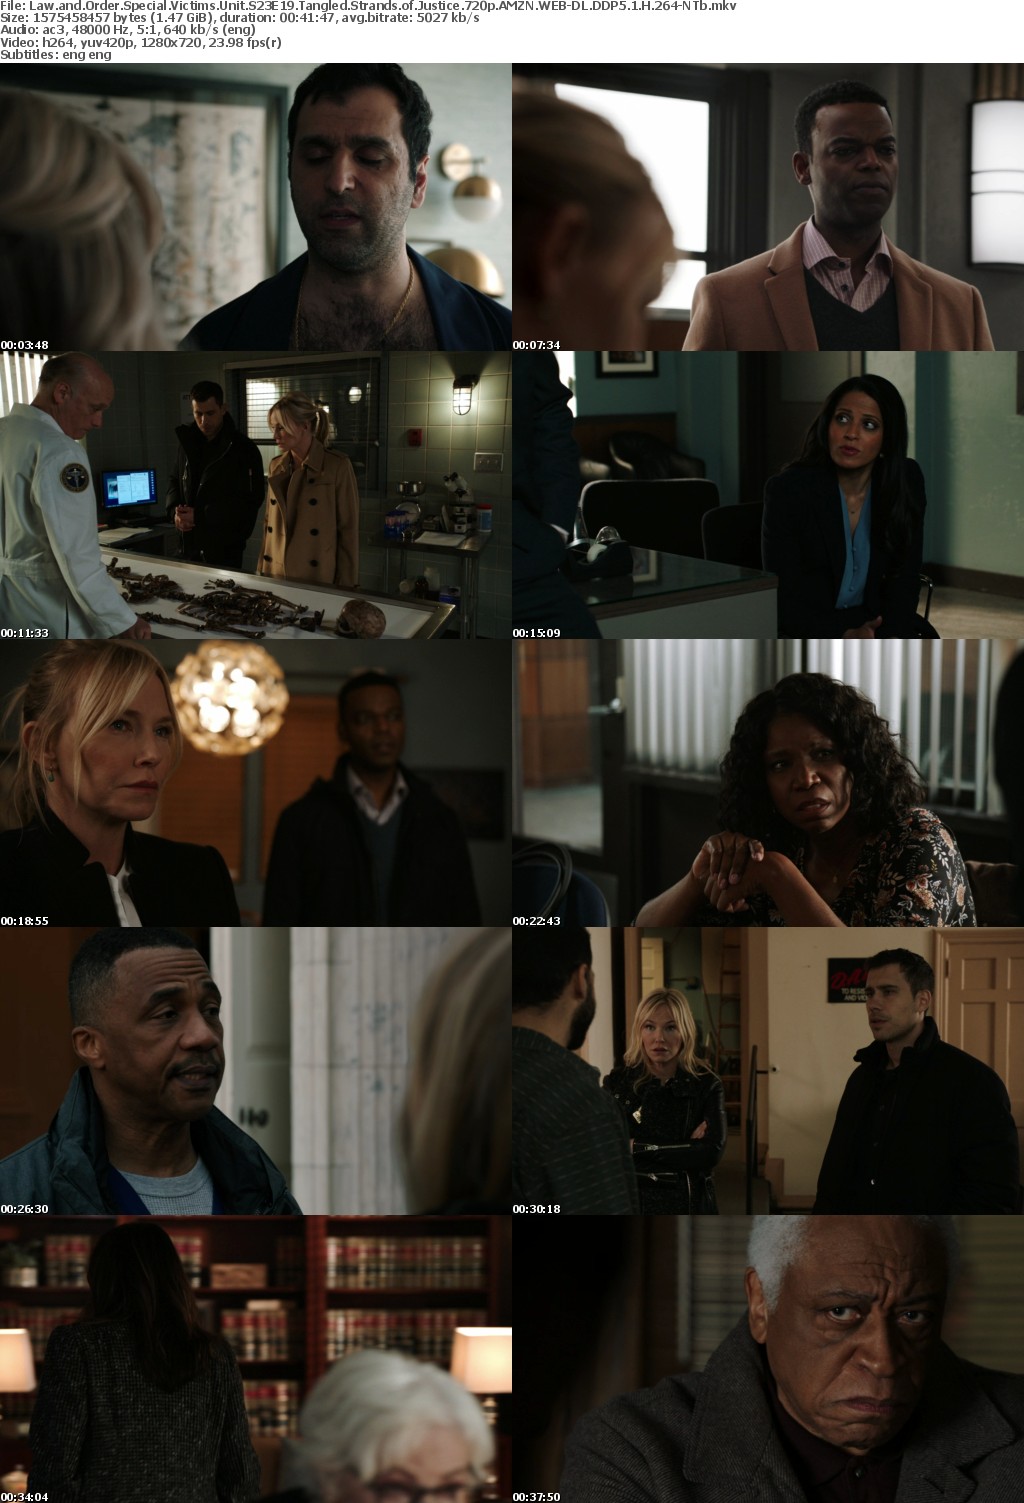 Law and Order SVU S23E19 Tangled Strands of Justice 720p AMZN WEBRip DDP5 1 x264